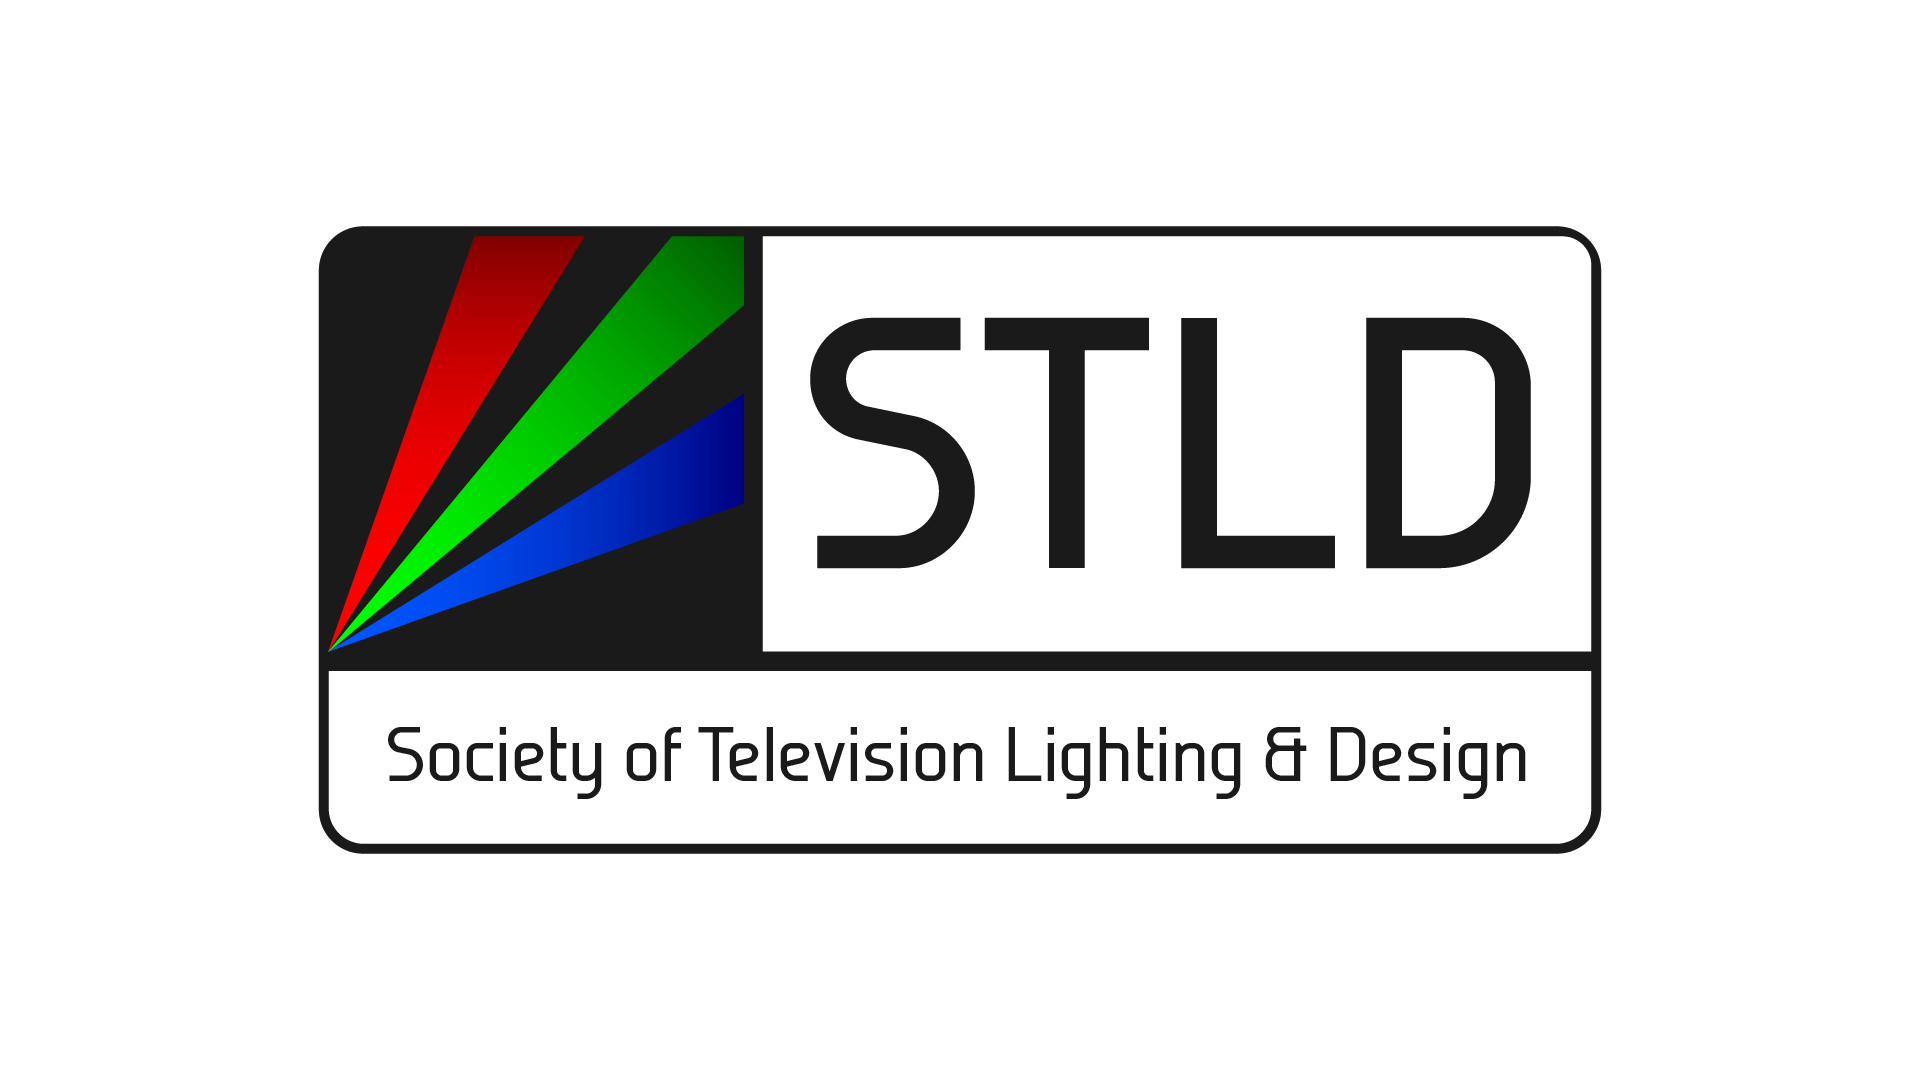 Society of Television Lighting and Design